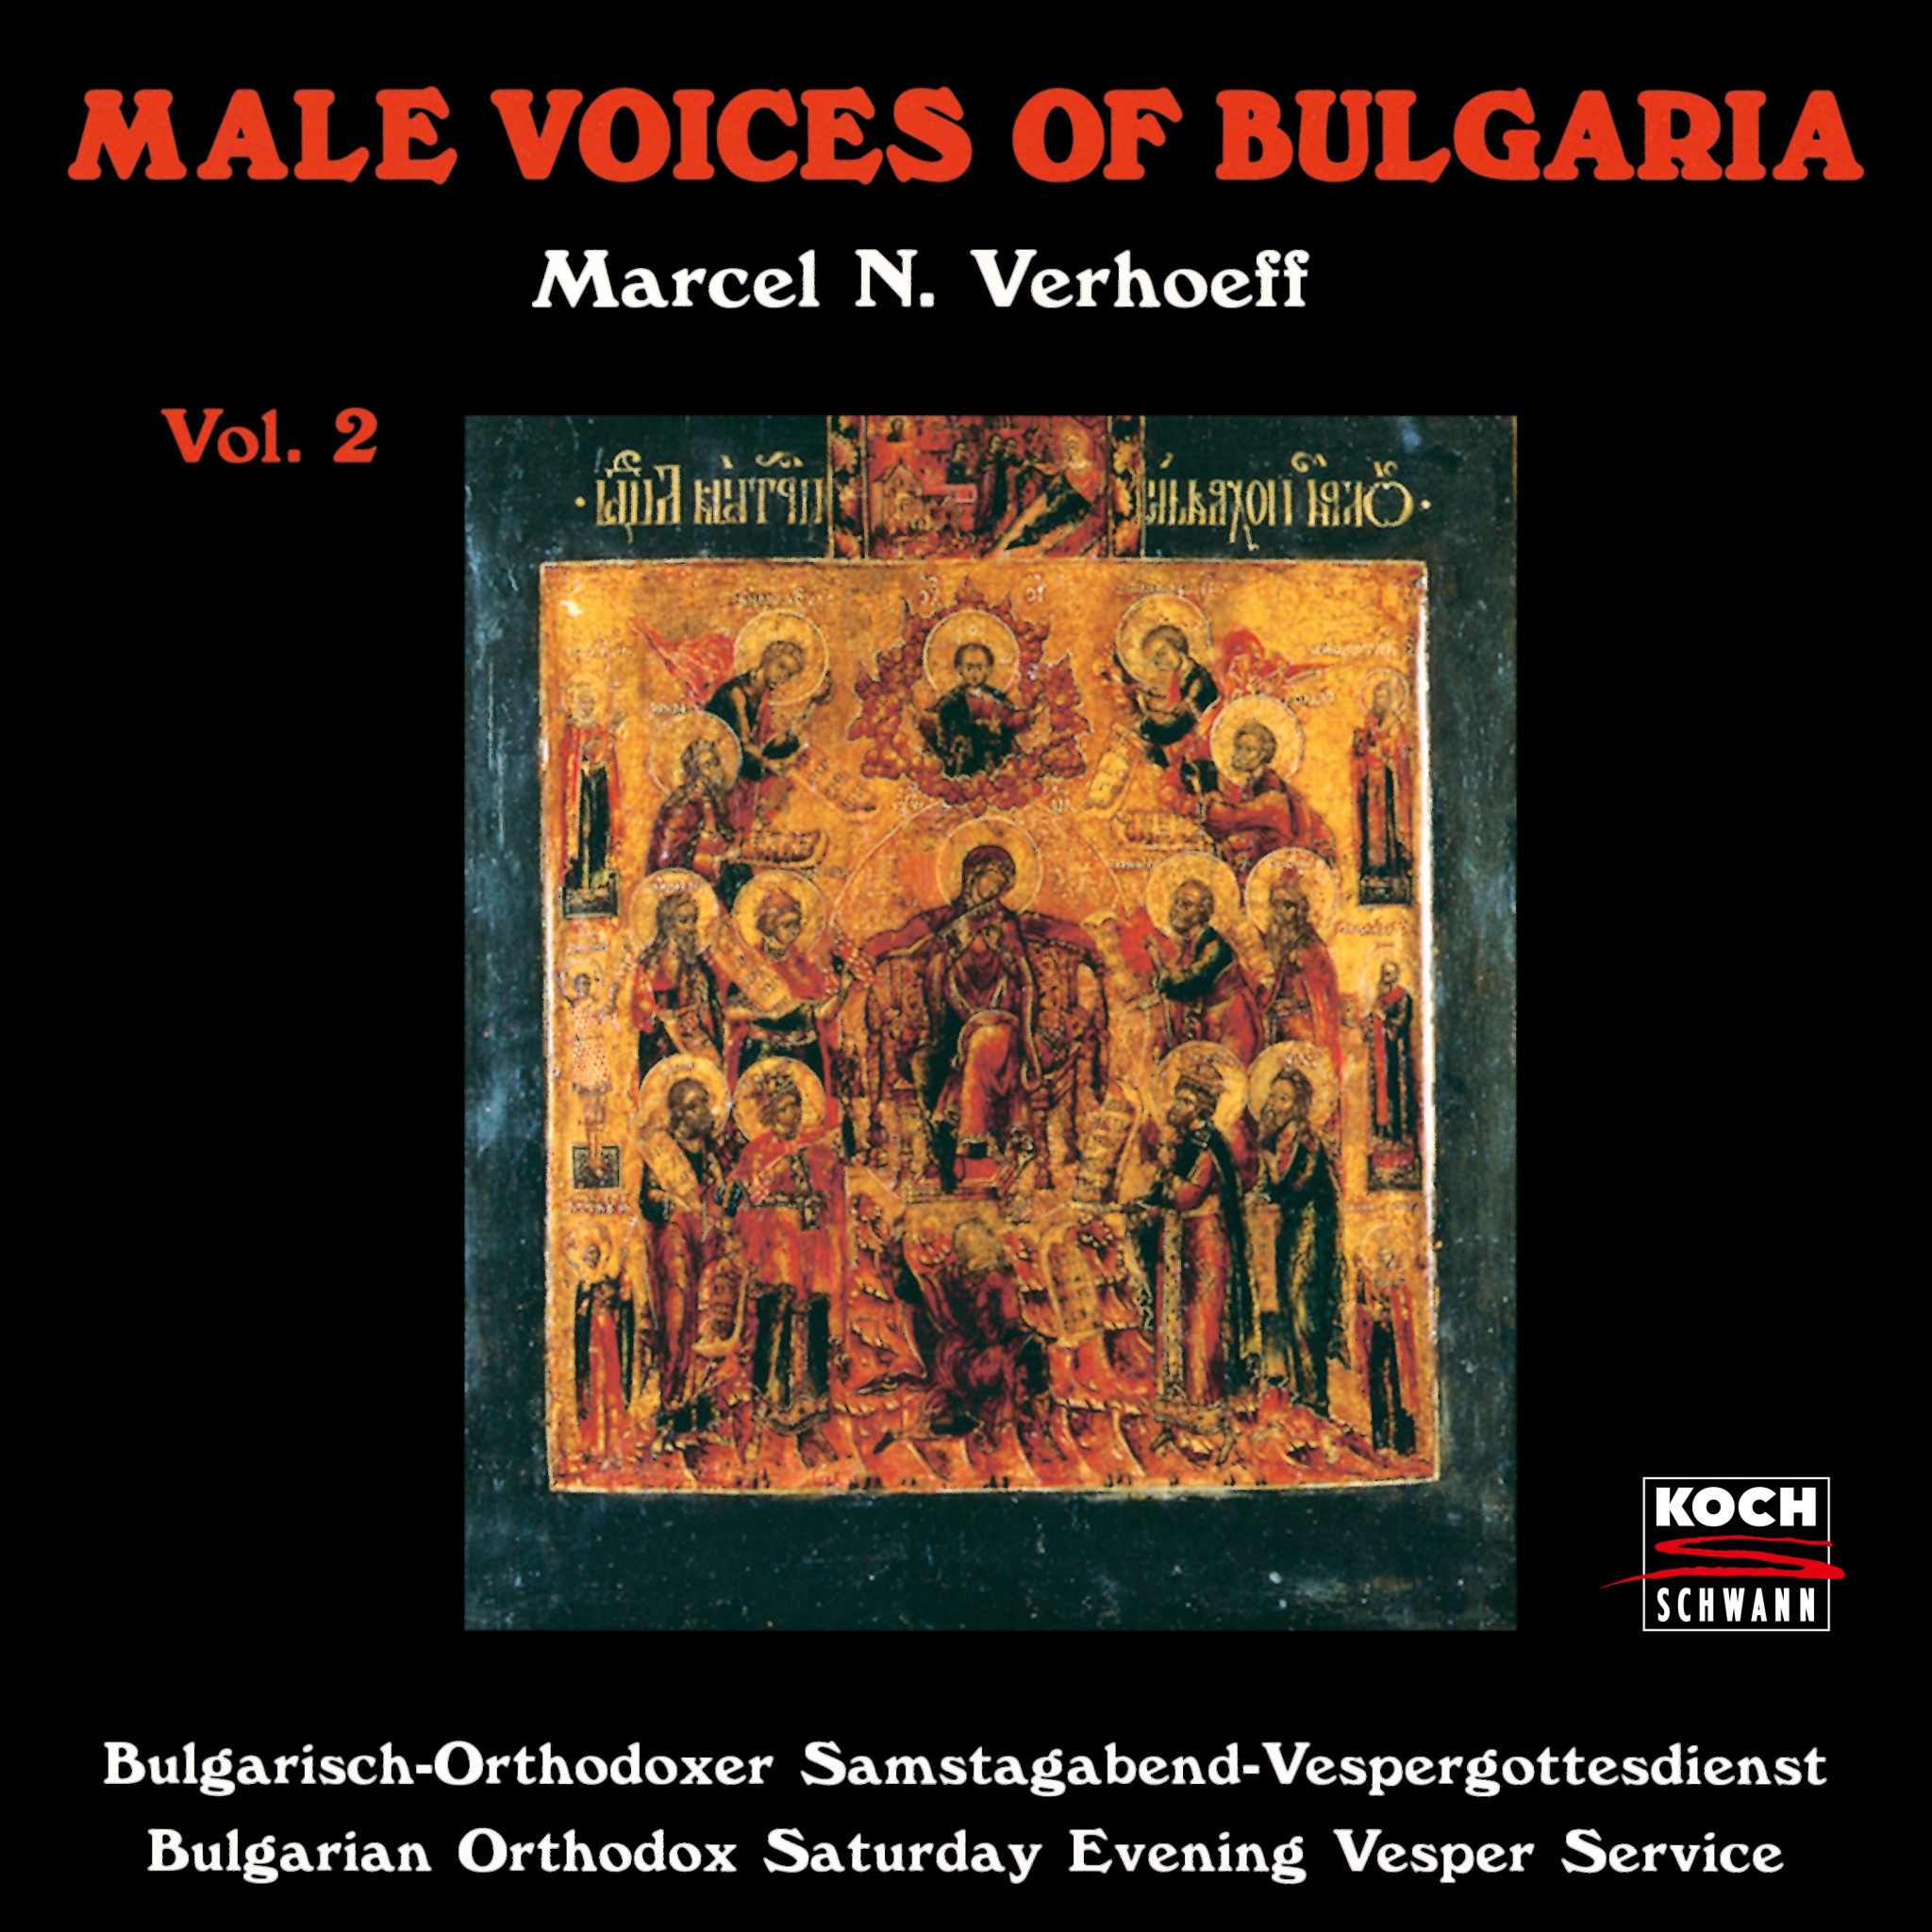 The Male Voices of Bulgaria: Vol. 2